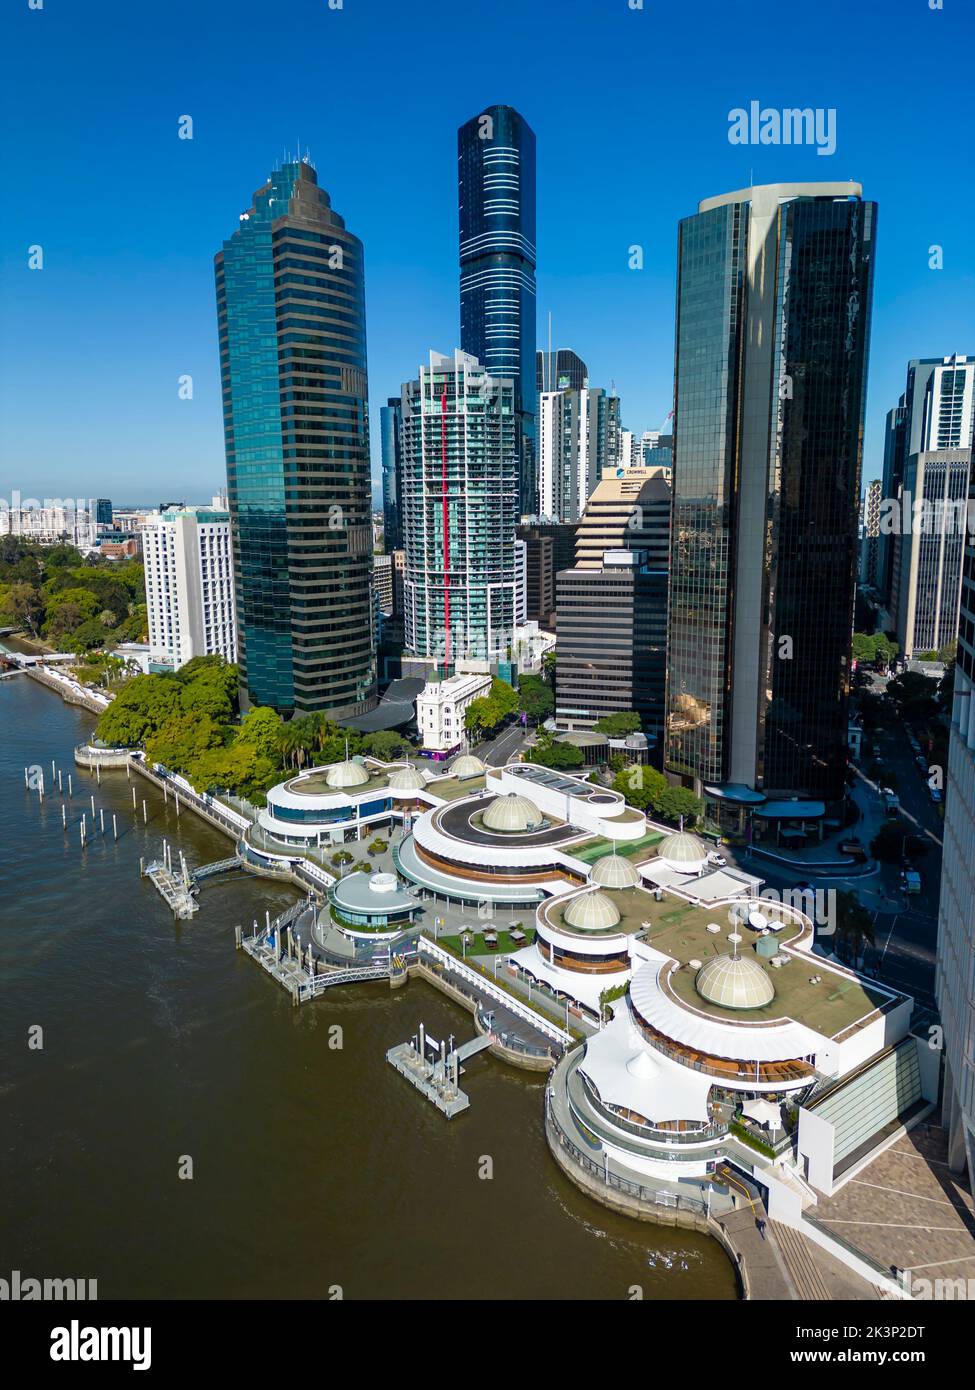 Brisbane, Australia - Aug 2, 2022: Aerial view of the iconic Eagle Street Pier which will be demolised for redevelopment into new riverside precinct Stock Photo